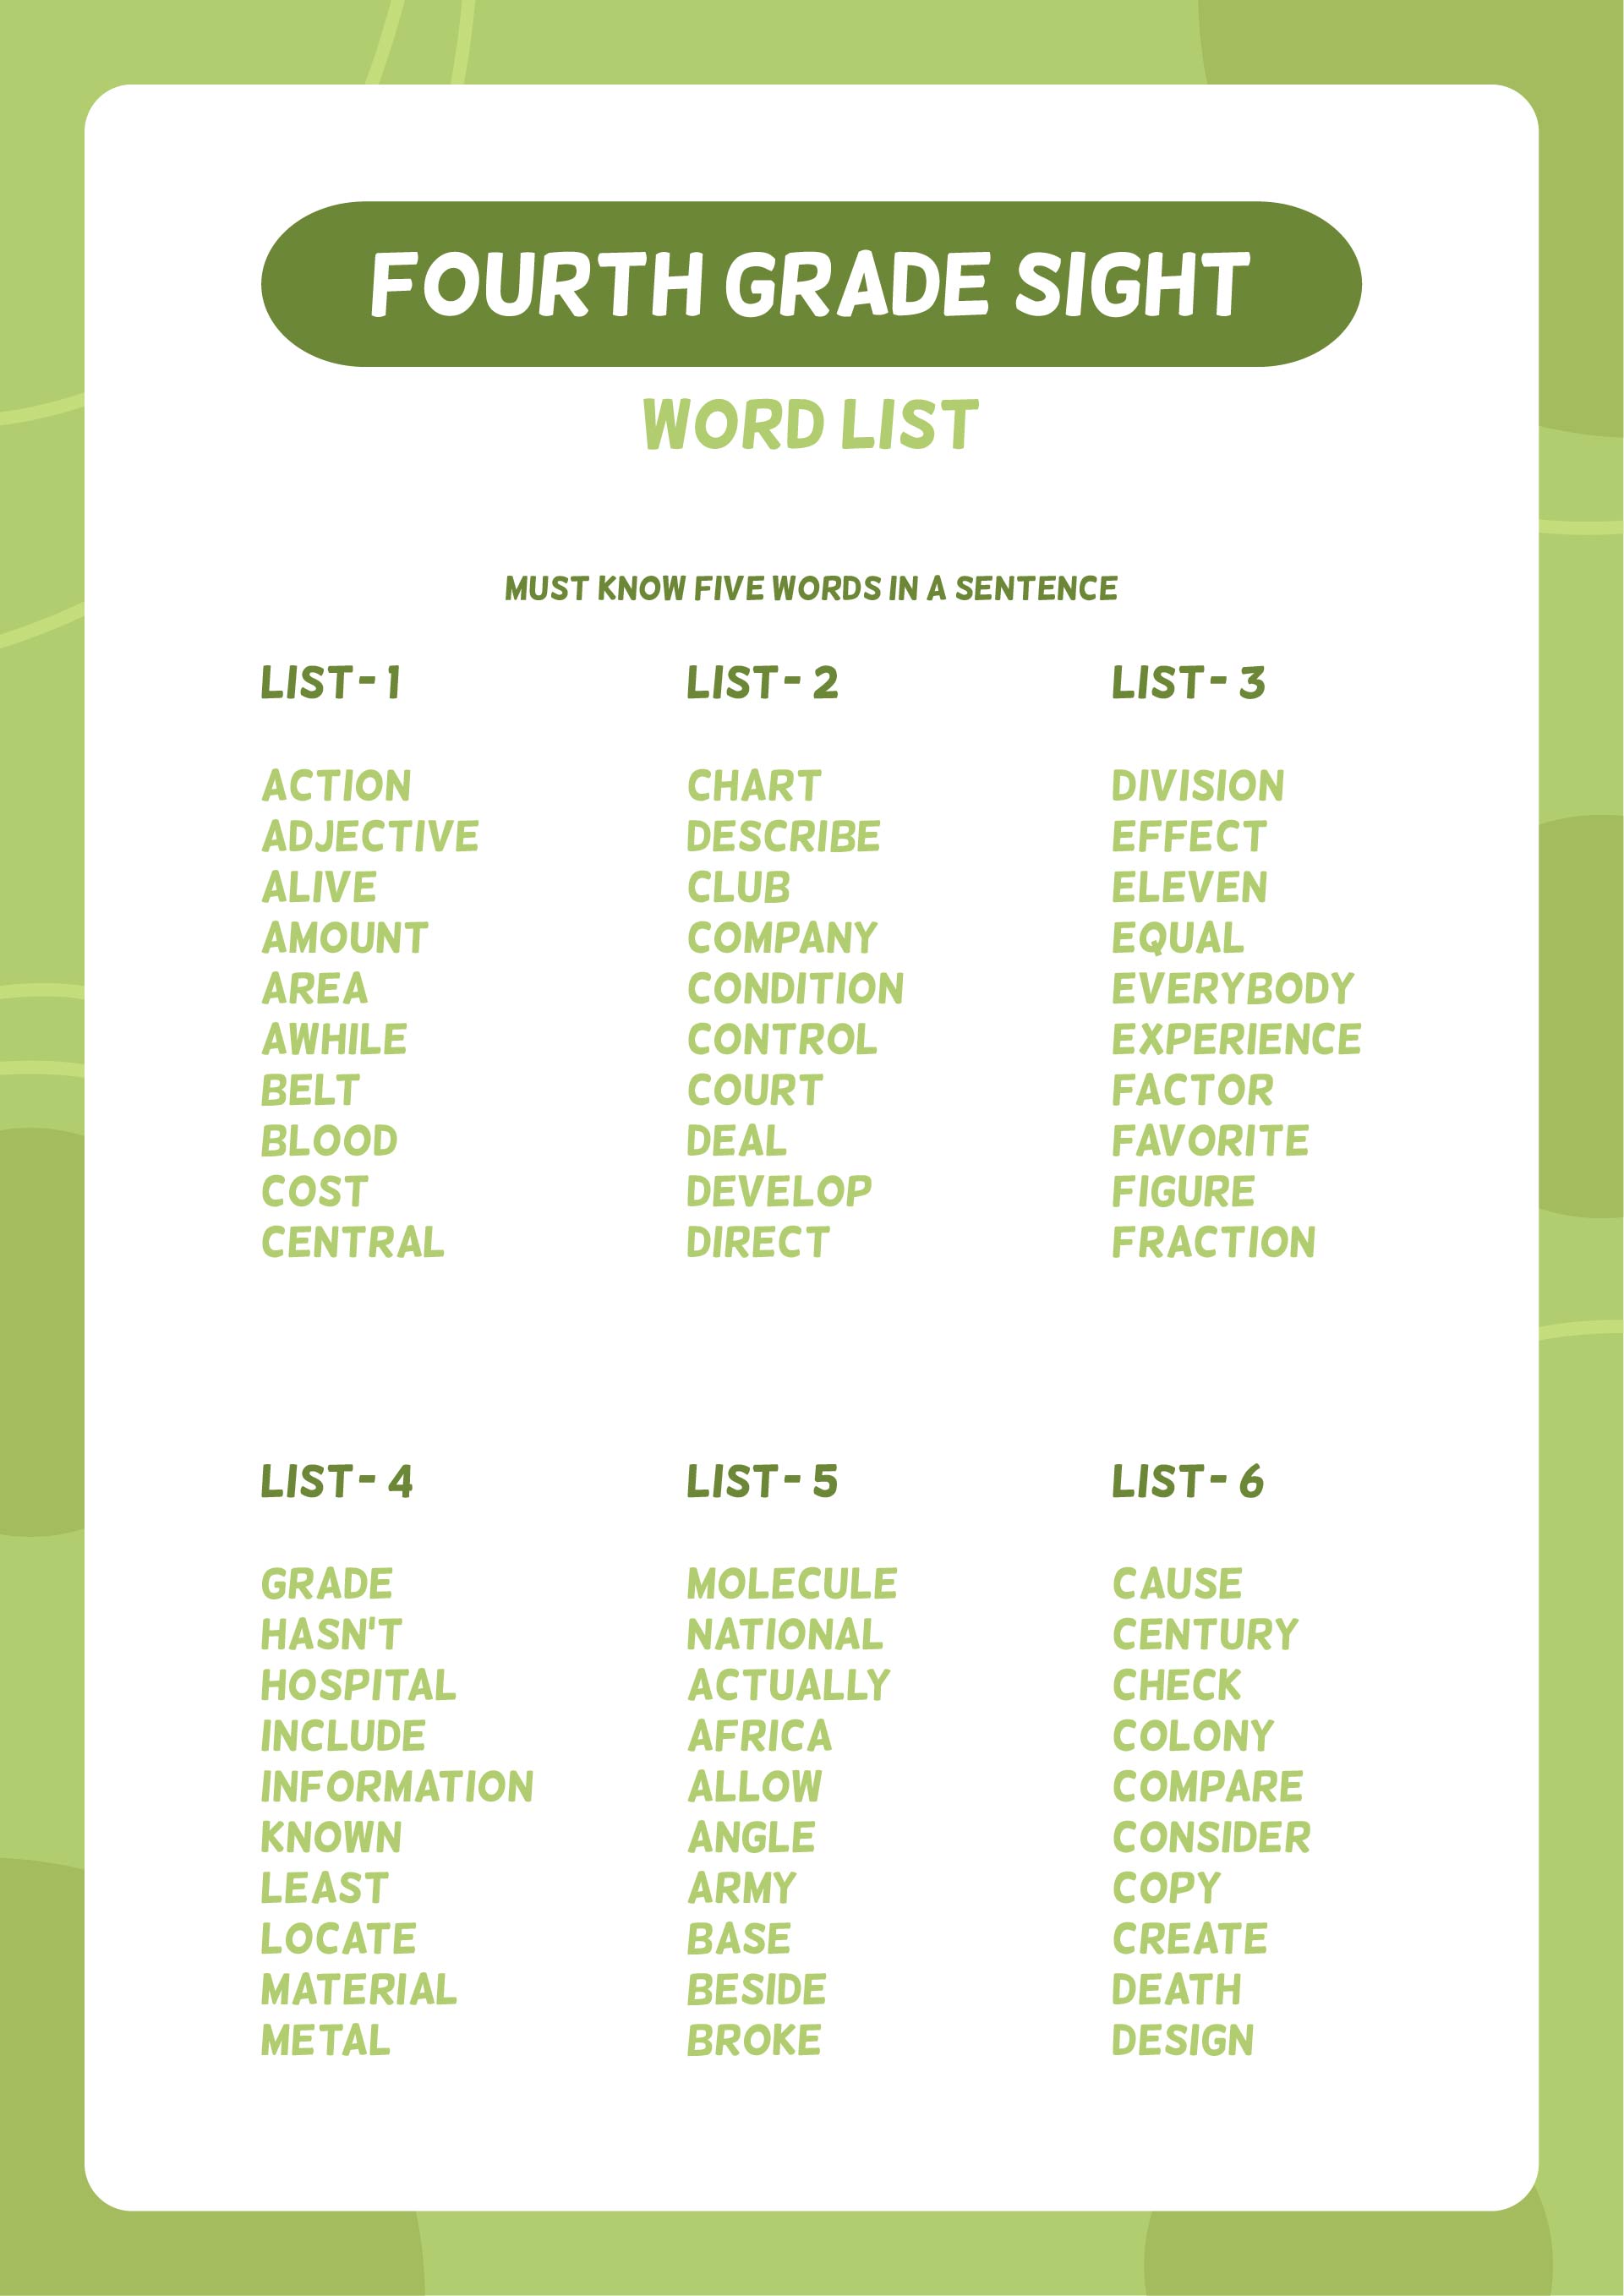 9-best-images-of-fourth-grade-sight-words-printable-4th-grade-sight